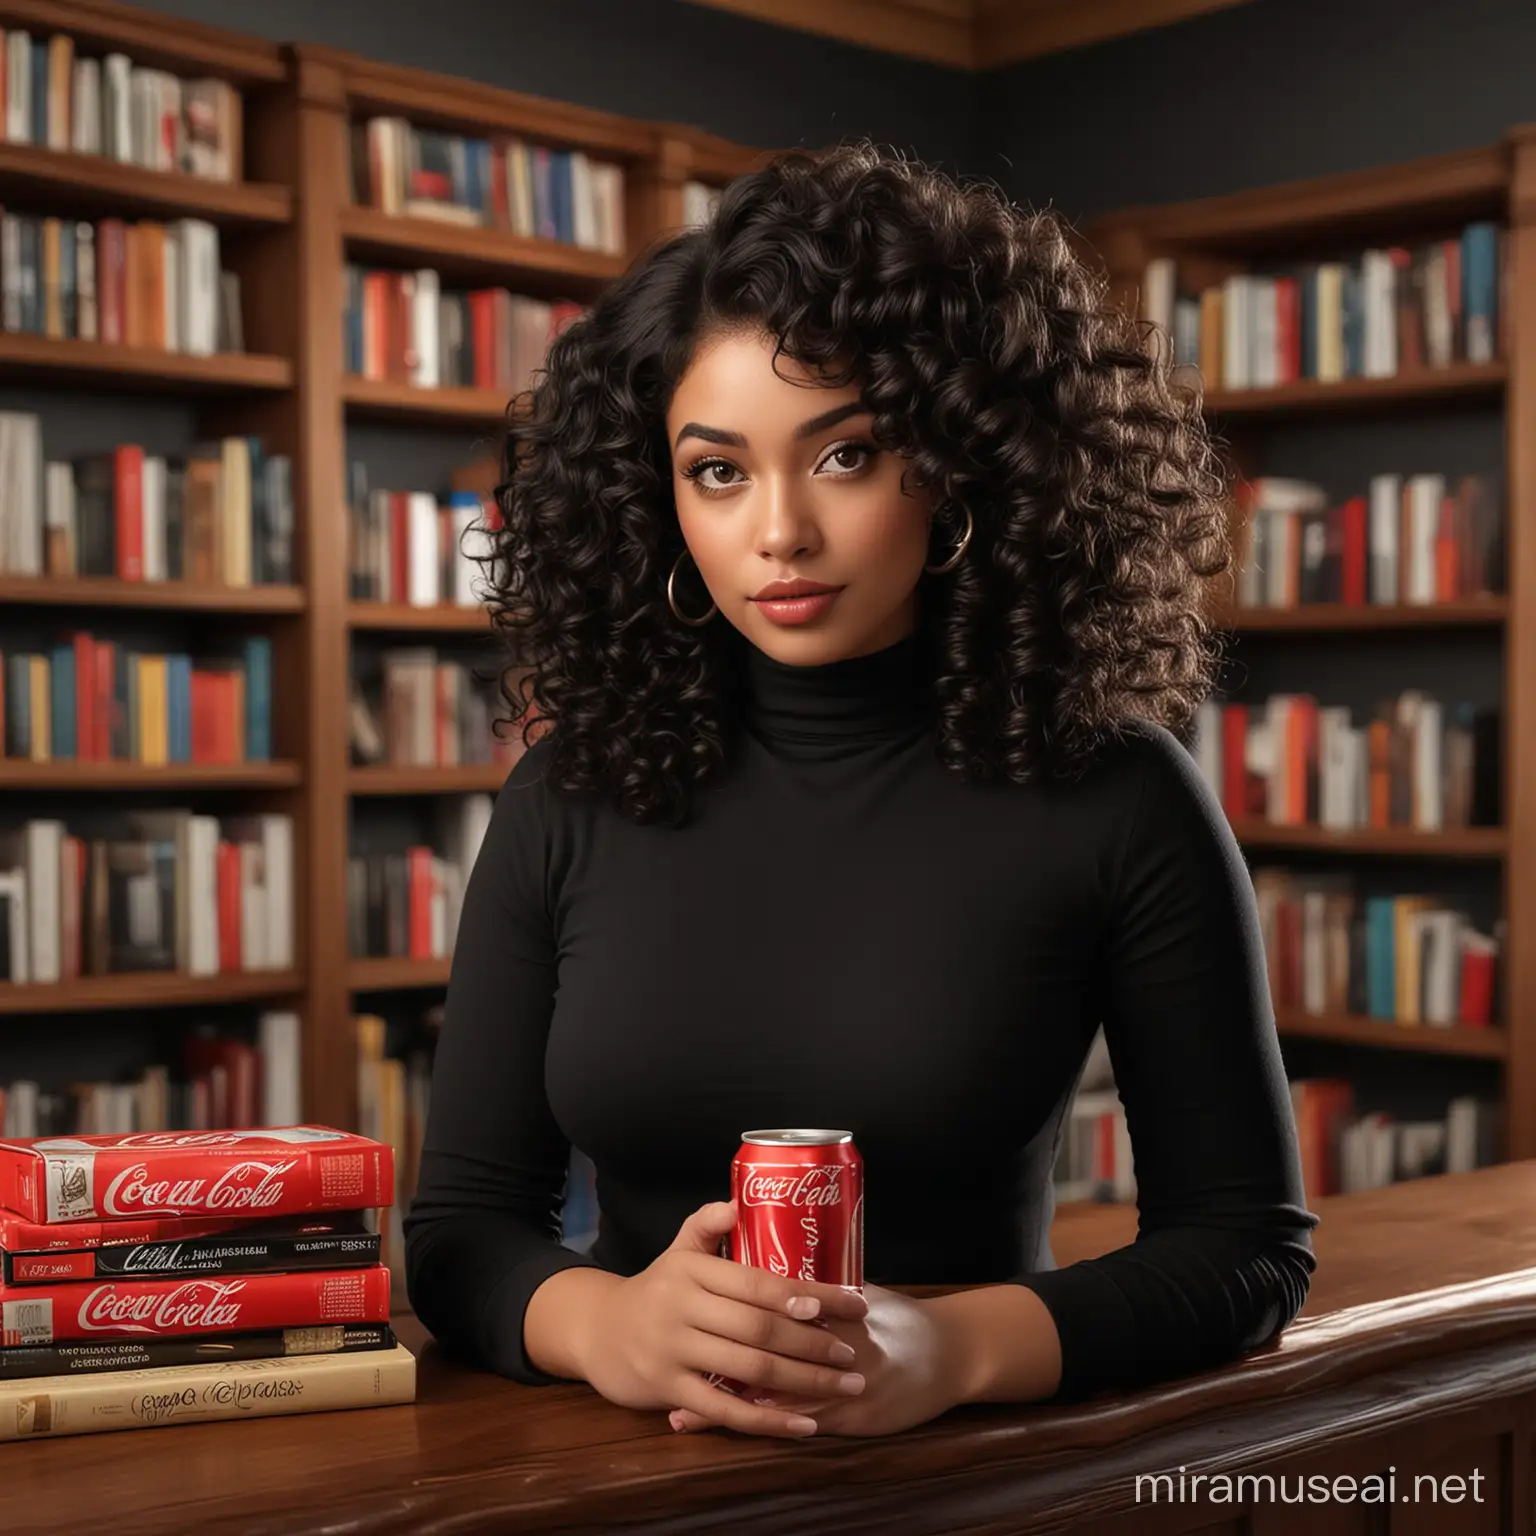 Create a hyper-realistic image of a curvaceous woman with dark skin and voluminous curly black hair, wearing a form-fitting black turtleneck shirt. She has a poised expression and subtle makeup highlighting her eyes and lips. She is standing in an elegant room with wooden bookshelves filled with books in the background. She is holding a coca cola can, resting on a black circular base. The lighting is warm, enhancing the golden hues and giving a luxurious ambiance to the setting, 32k render, hyperrealistic, detailled.